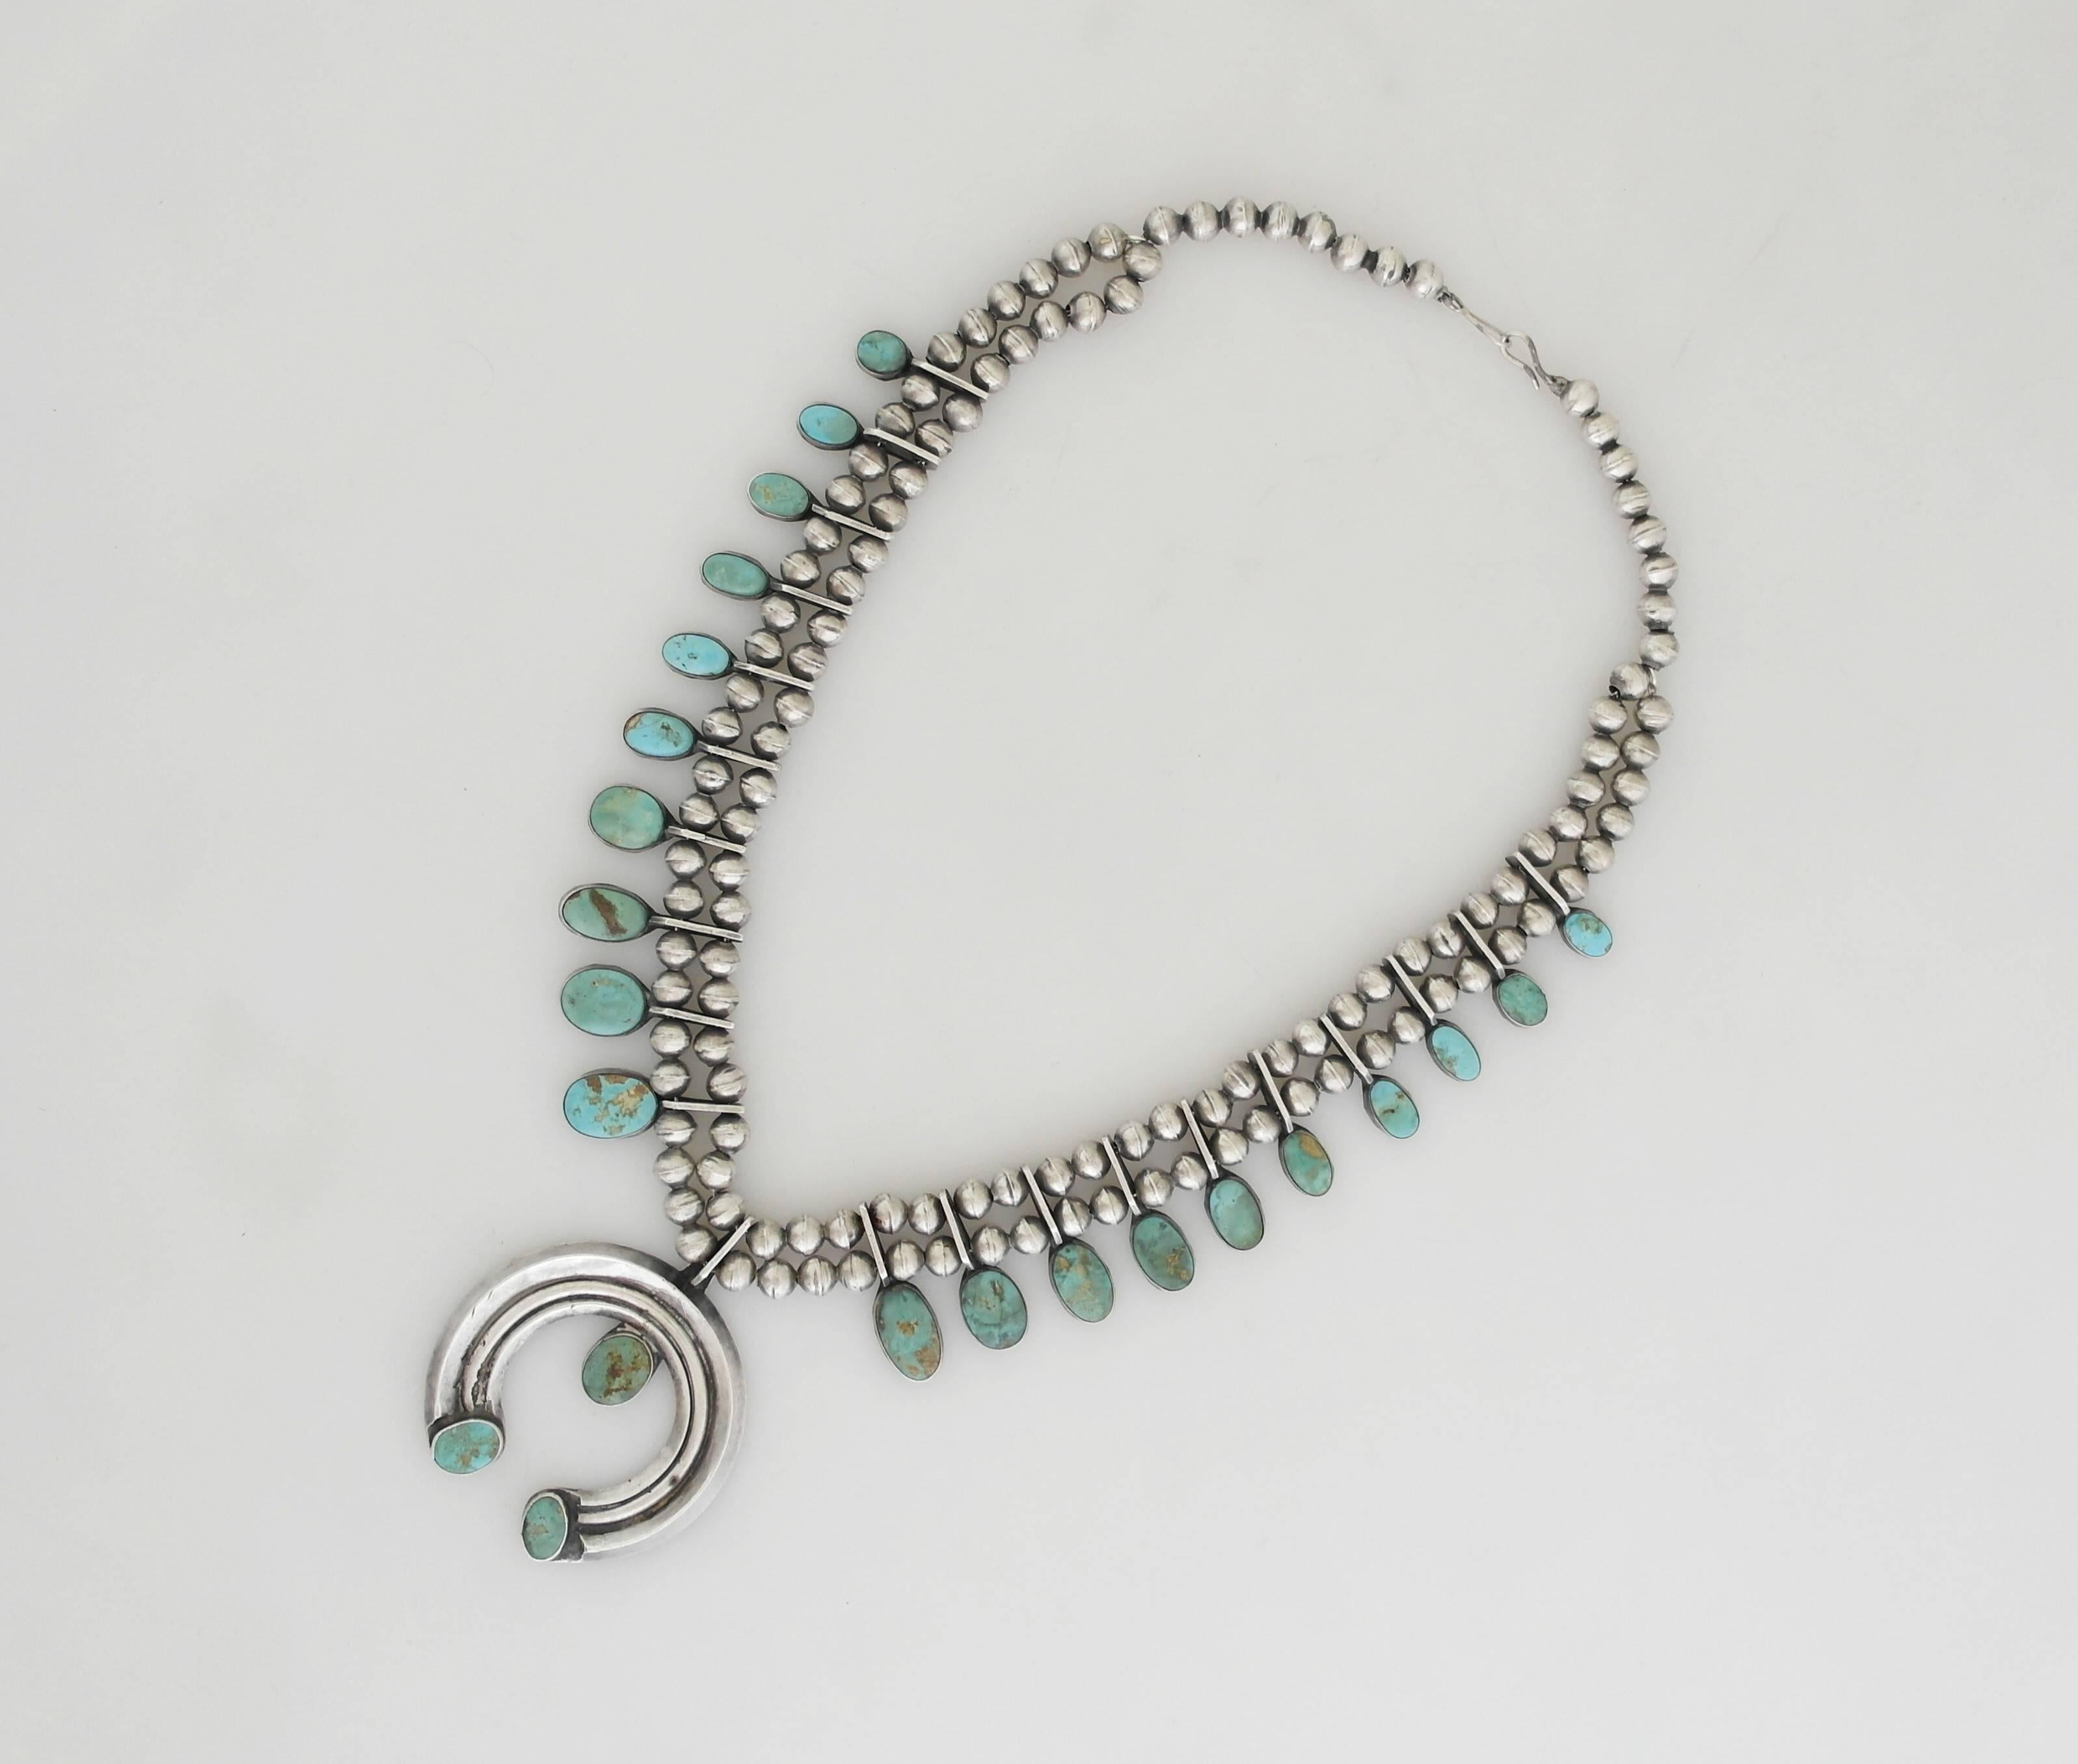 Being offered is a sterling silver necklace made by a skilled Native American silversmith. Beaded link necklace supporting bezel set turquoise stones; large pendant also decorated with turquoise. Dimensions: 23 inches (wearable); pendant is 3 inches